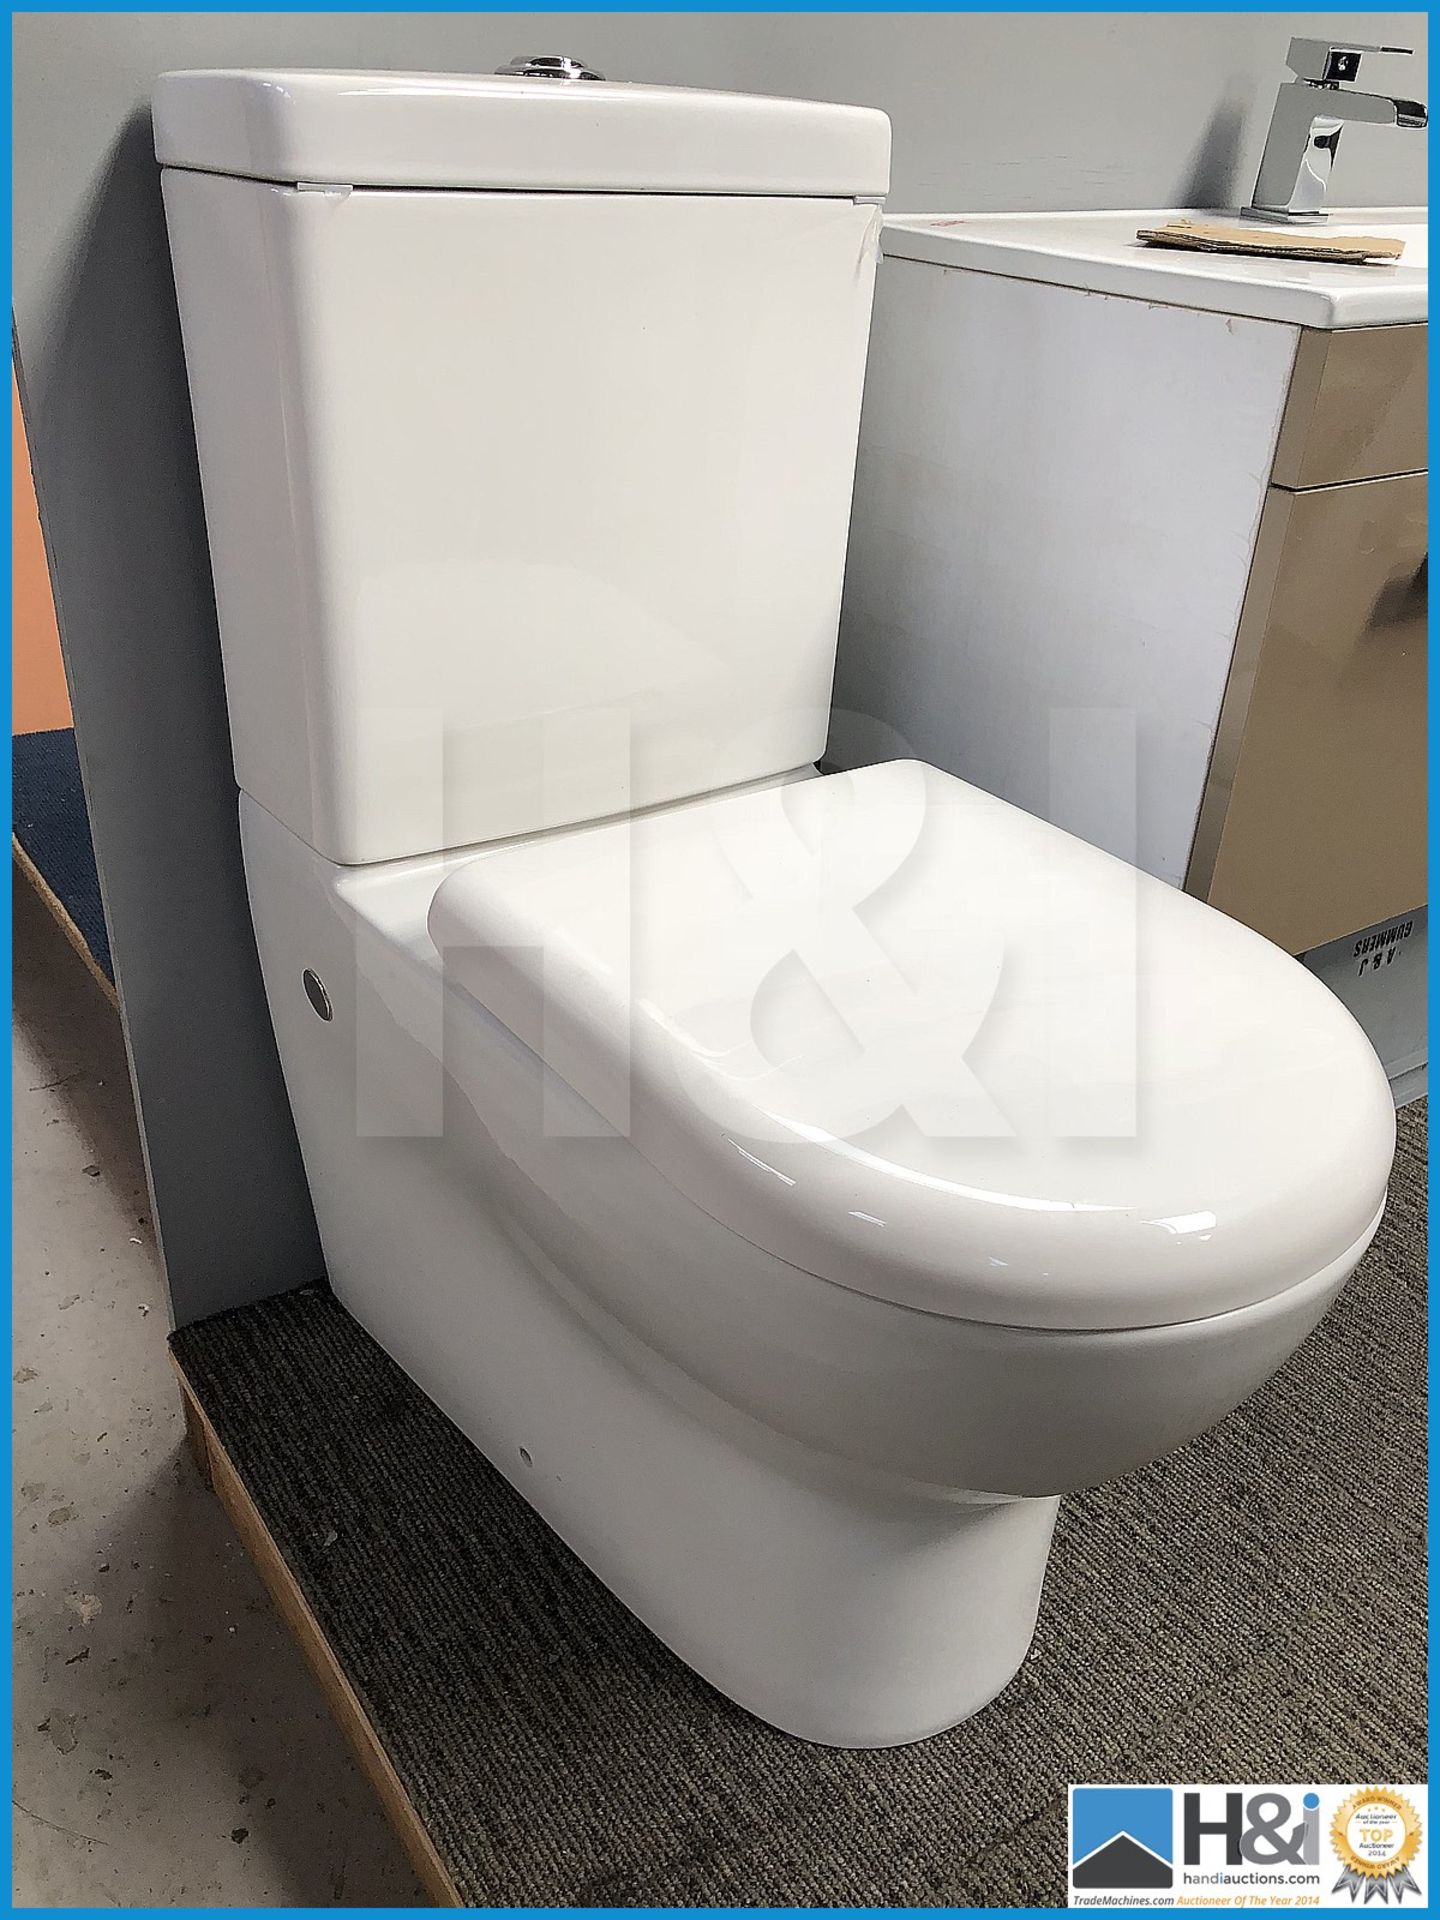 Designer K-014 contemporary WC with top flush and soft close seat .New and boxed. Suggested Manufact